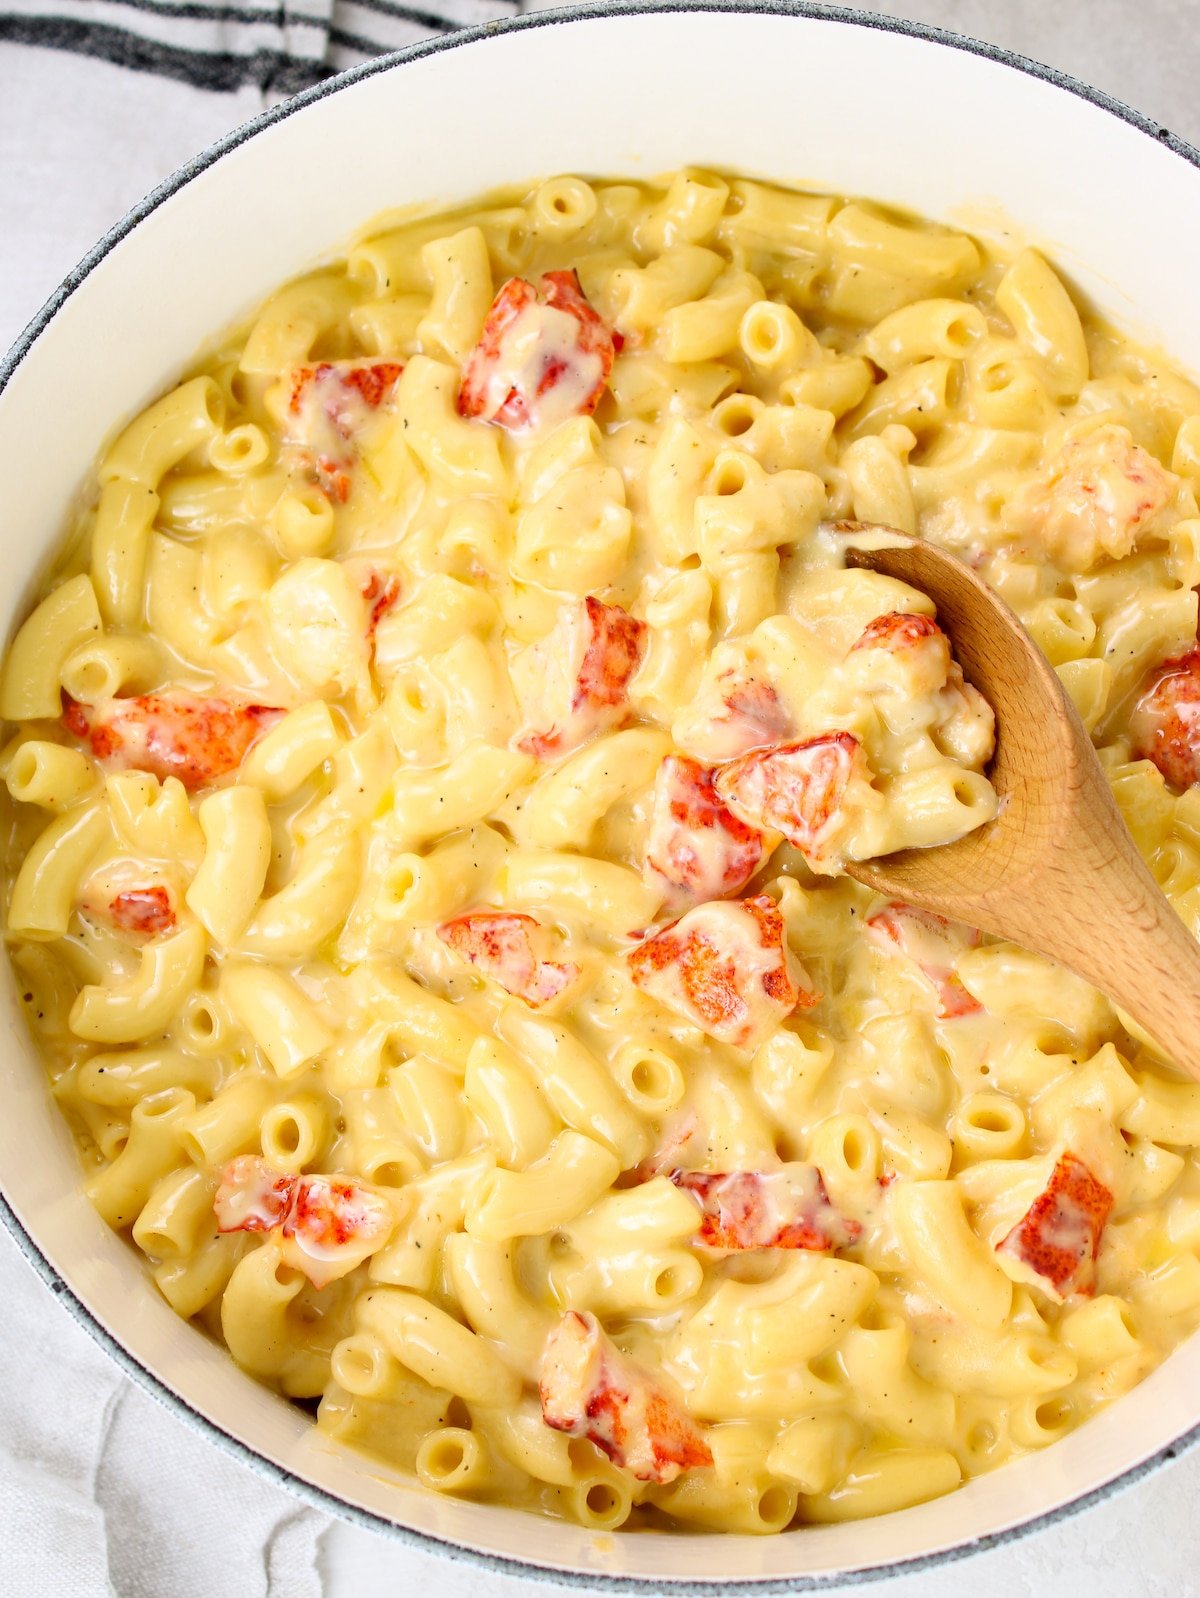 A large pot with Macaroni and Cheese with chopped pieces of lobster mixed in.